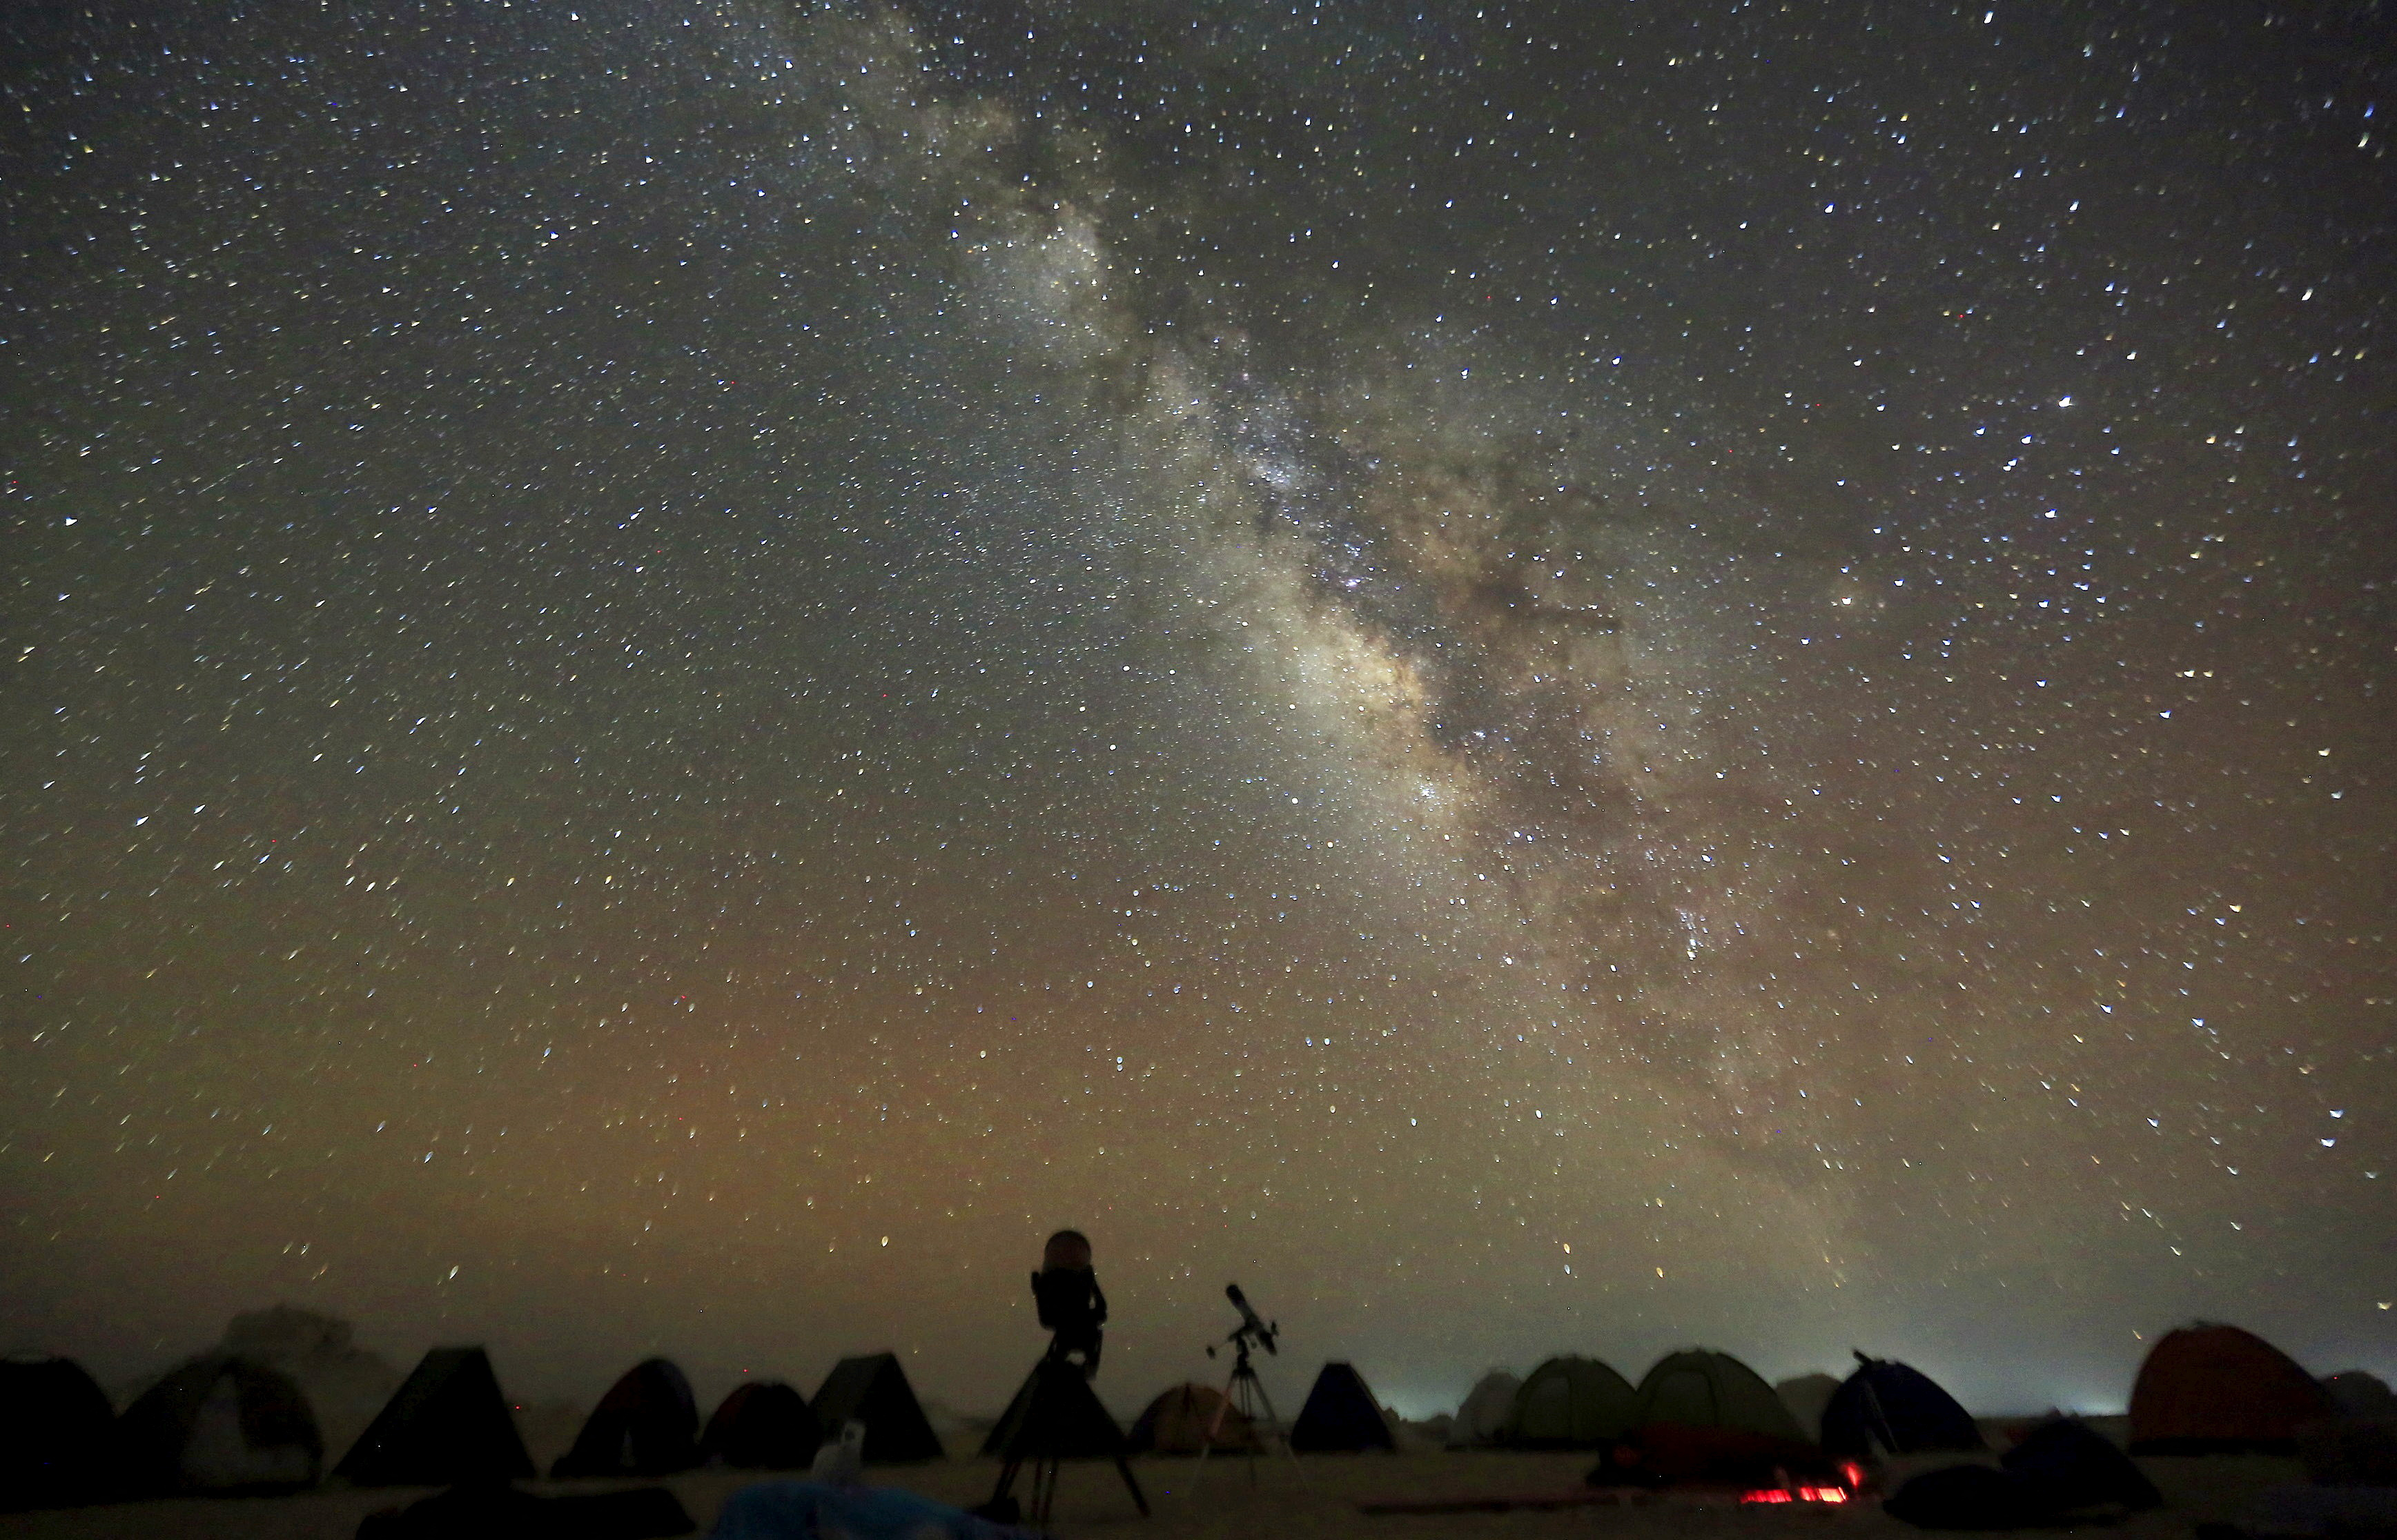 The Milky Way is seen in the night sky around telescopes and camps of people over rocks in the White Desert north of the Farafra Oasis southwest of Cairo